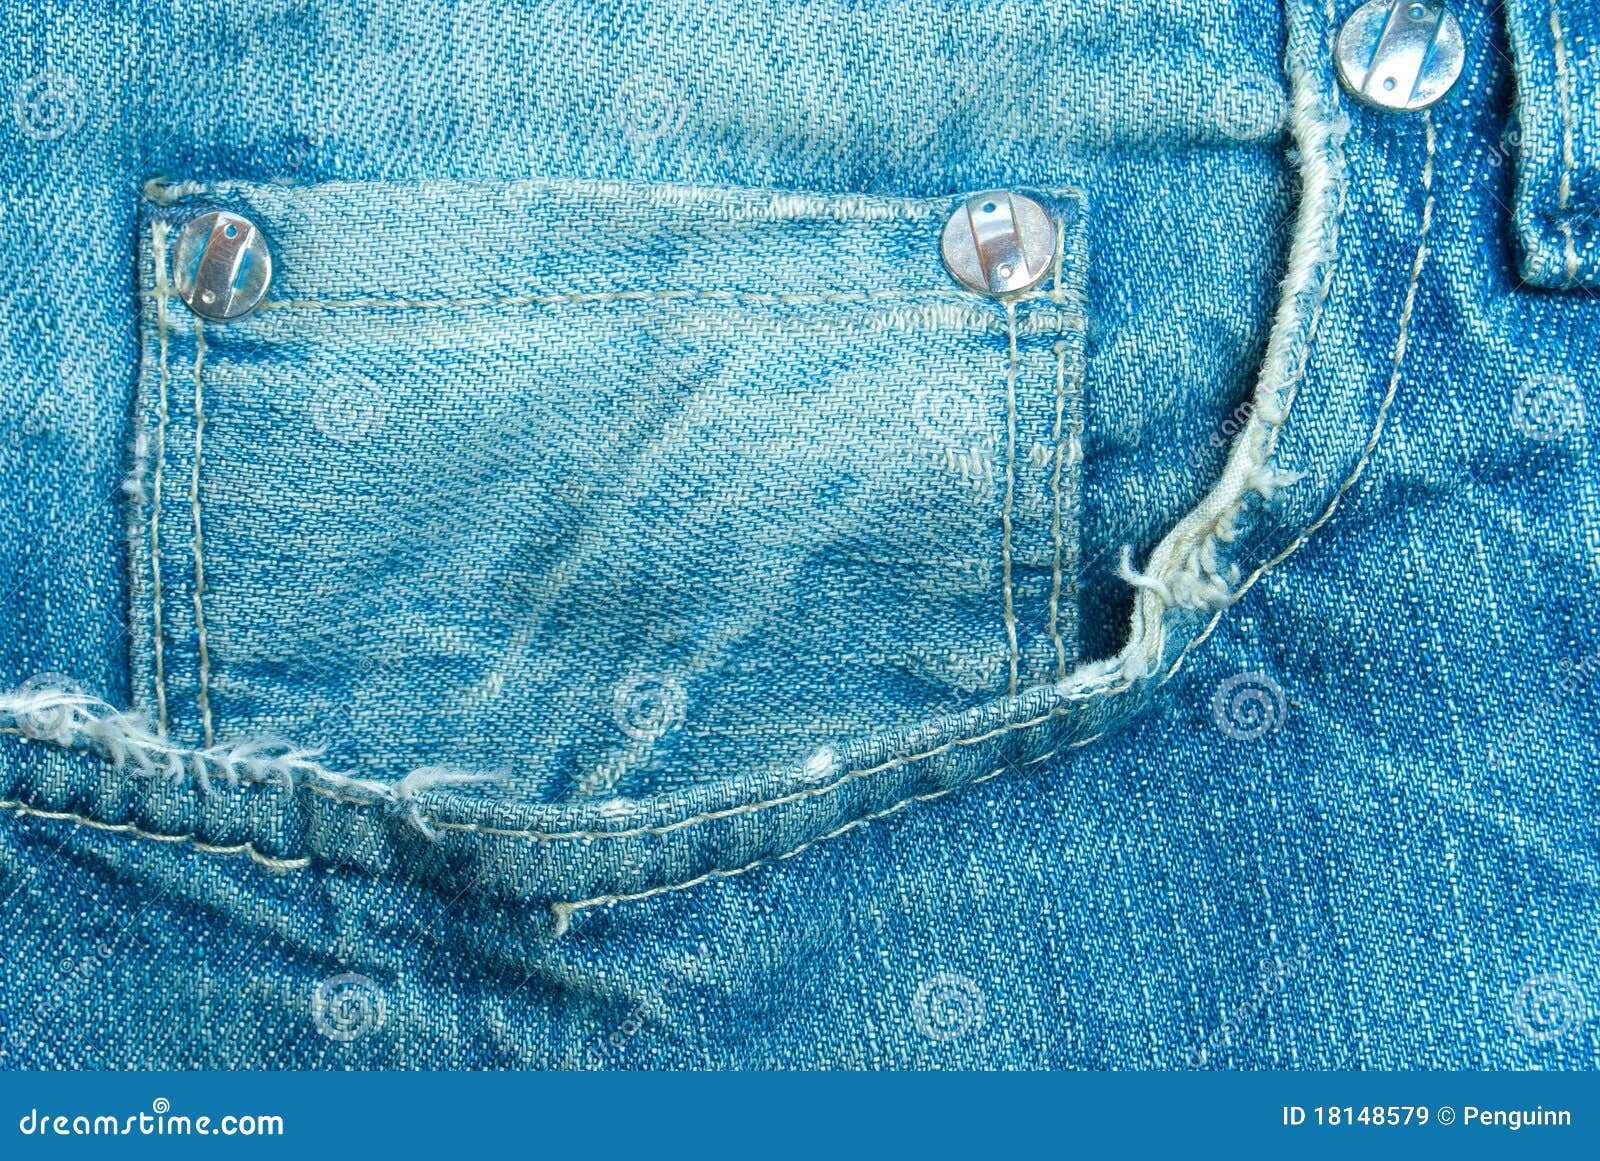 Blue jeans stock image. Image of material, blue, grunge - 18148579